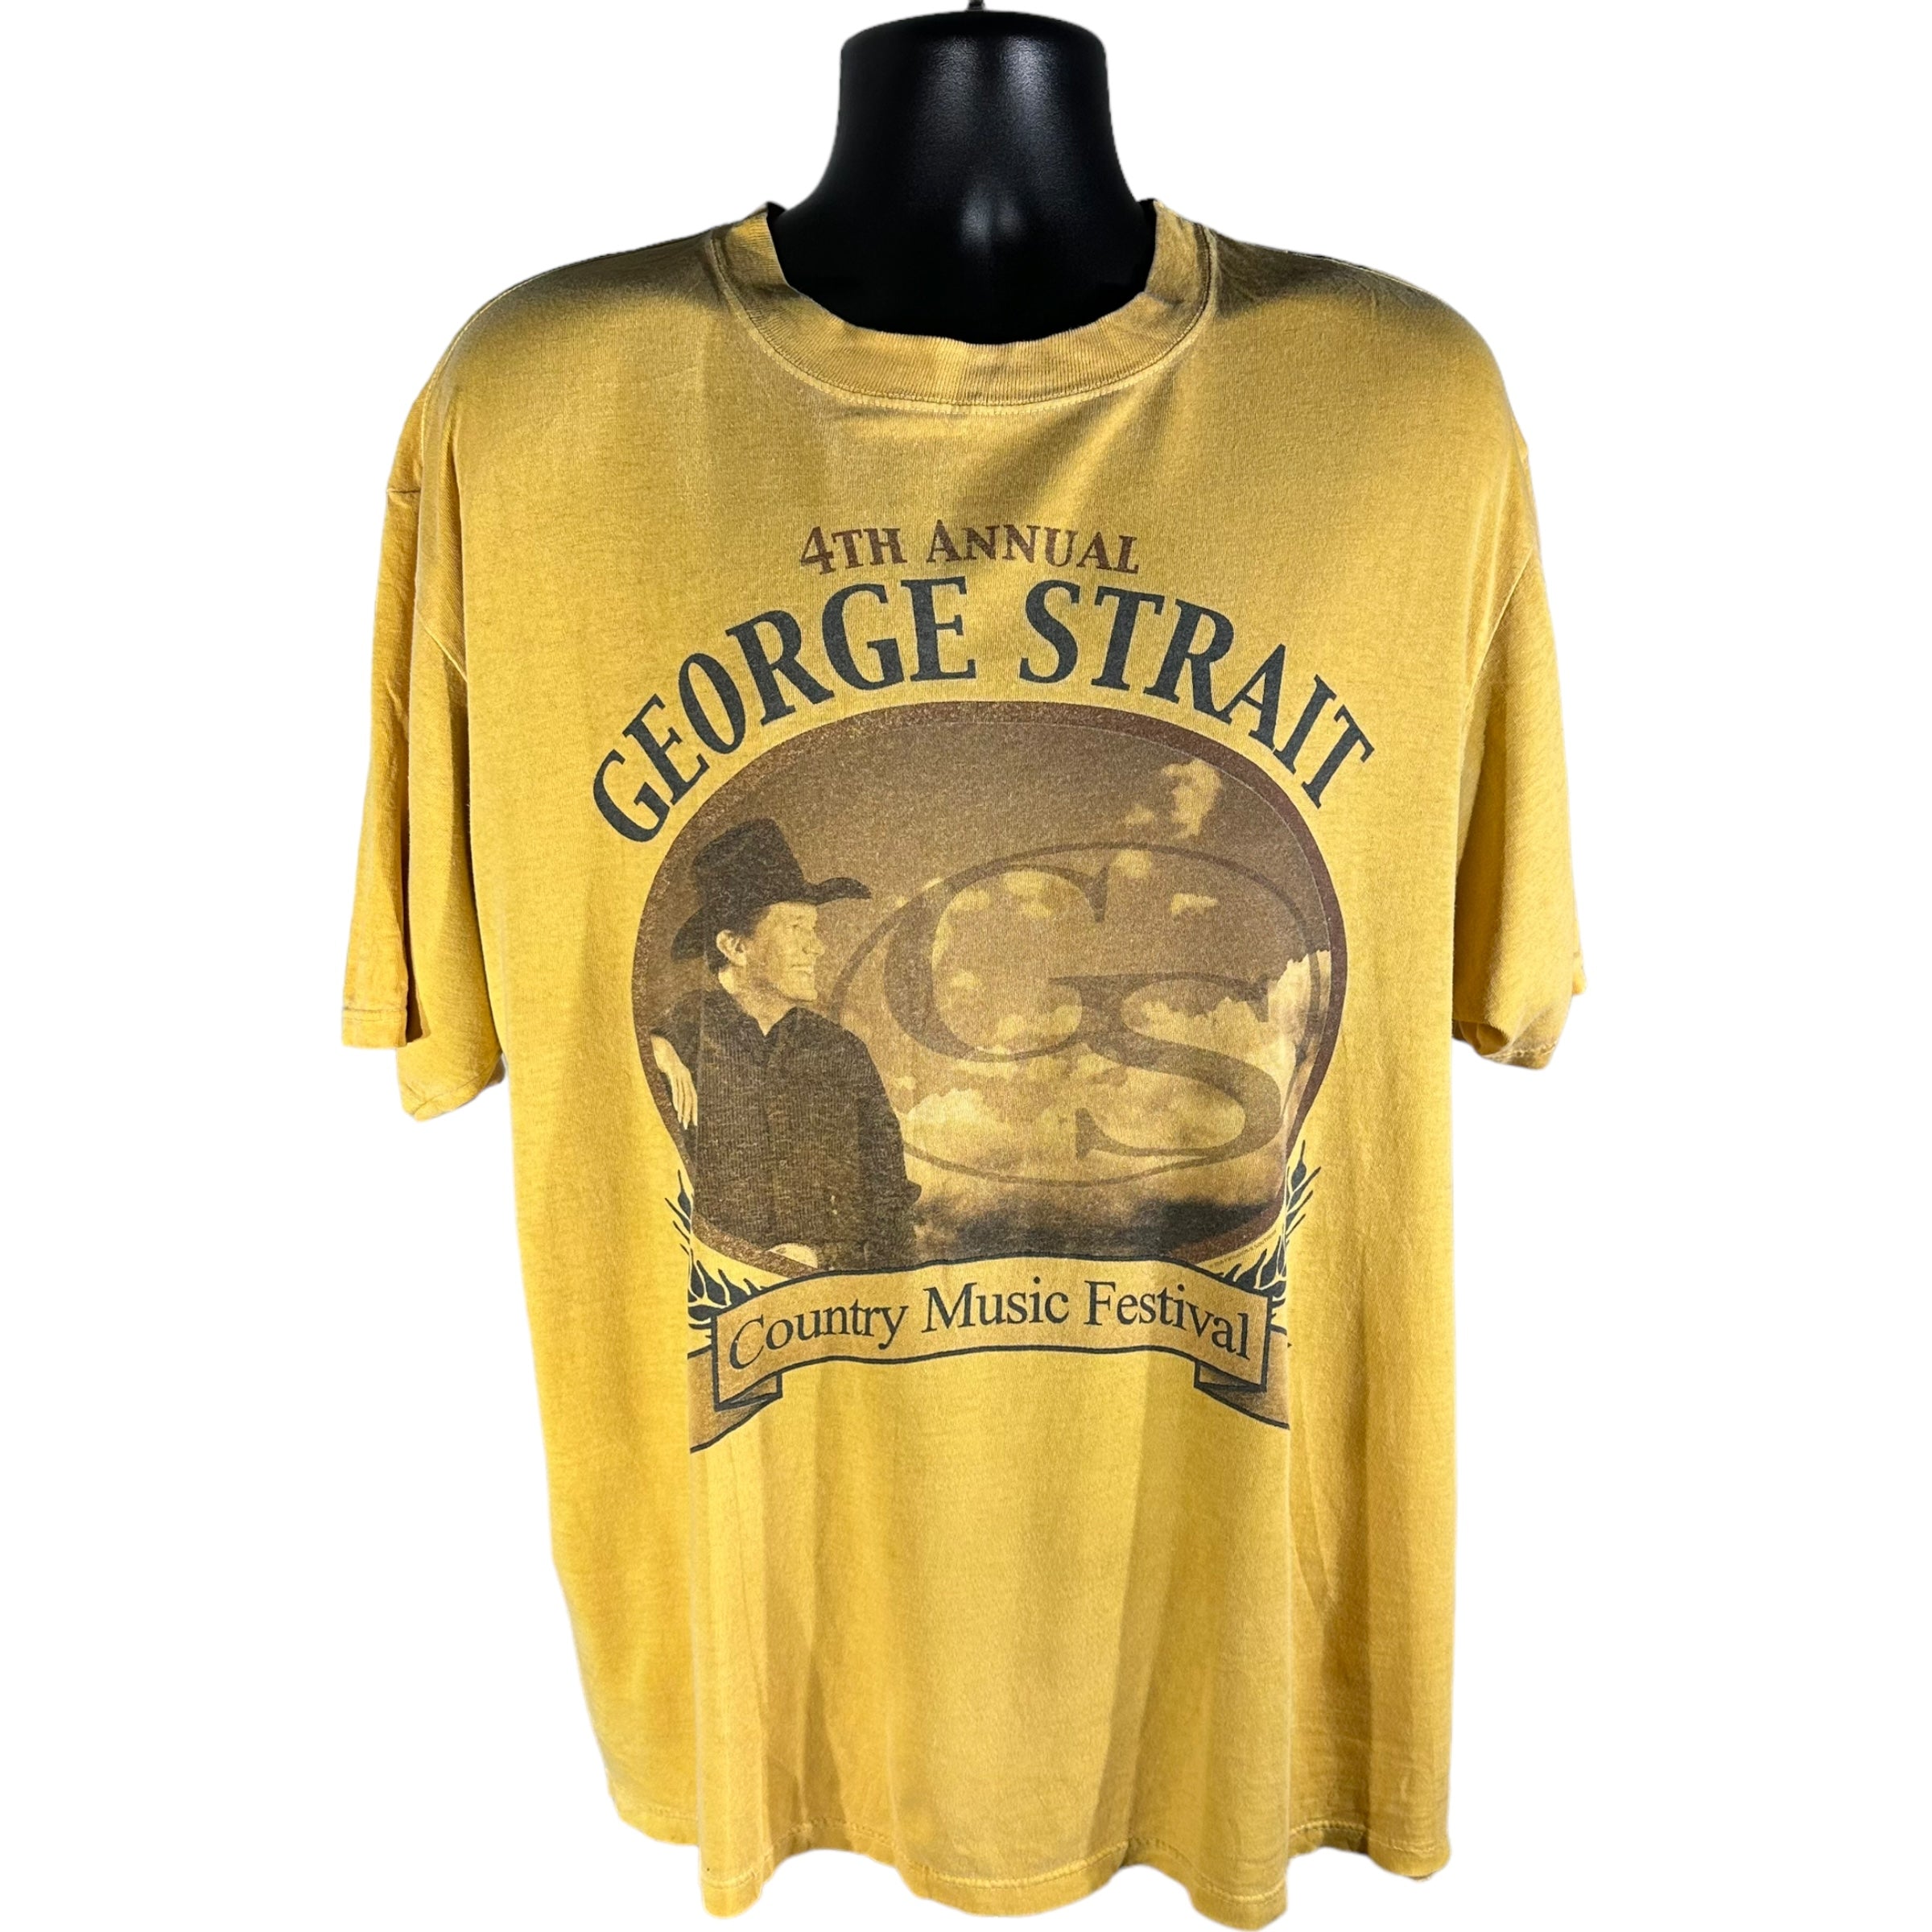 Vintage 4th Annual George Strait Country Music Festival Tee